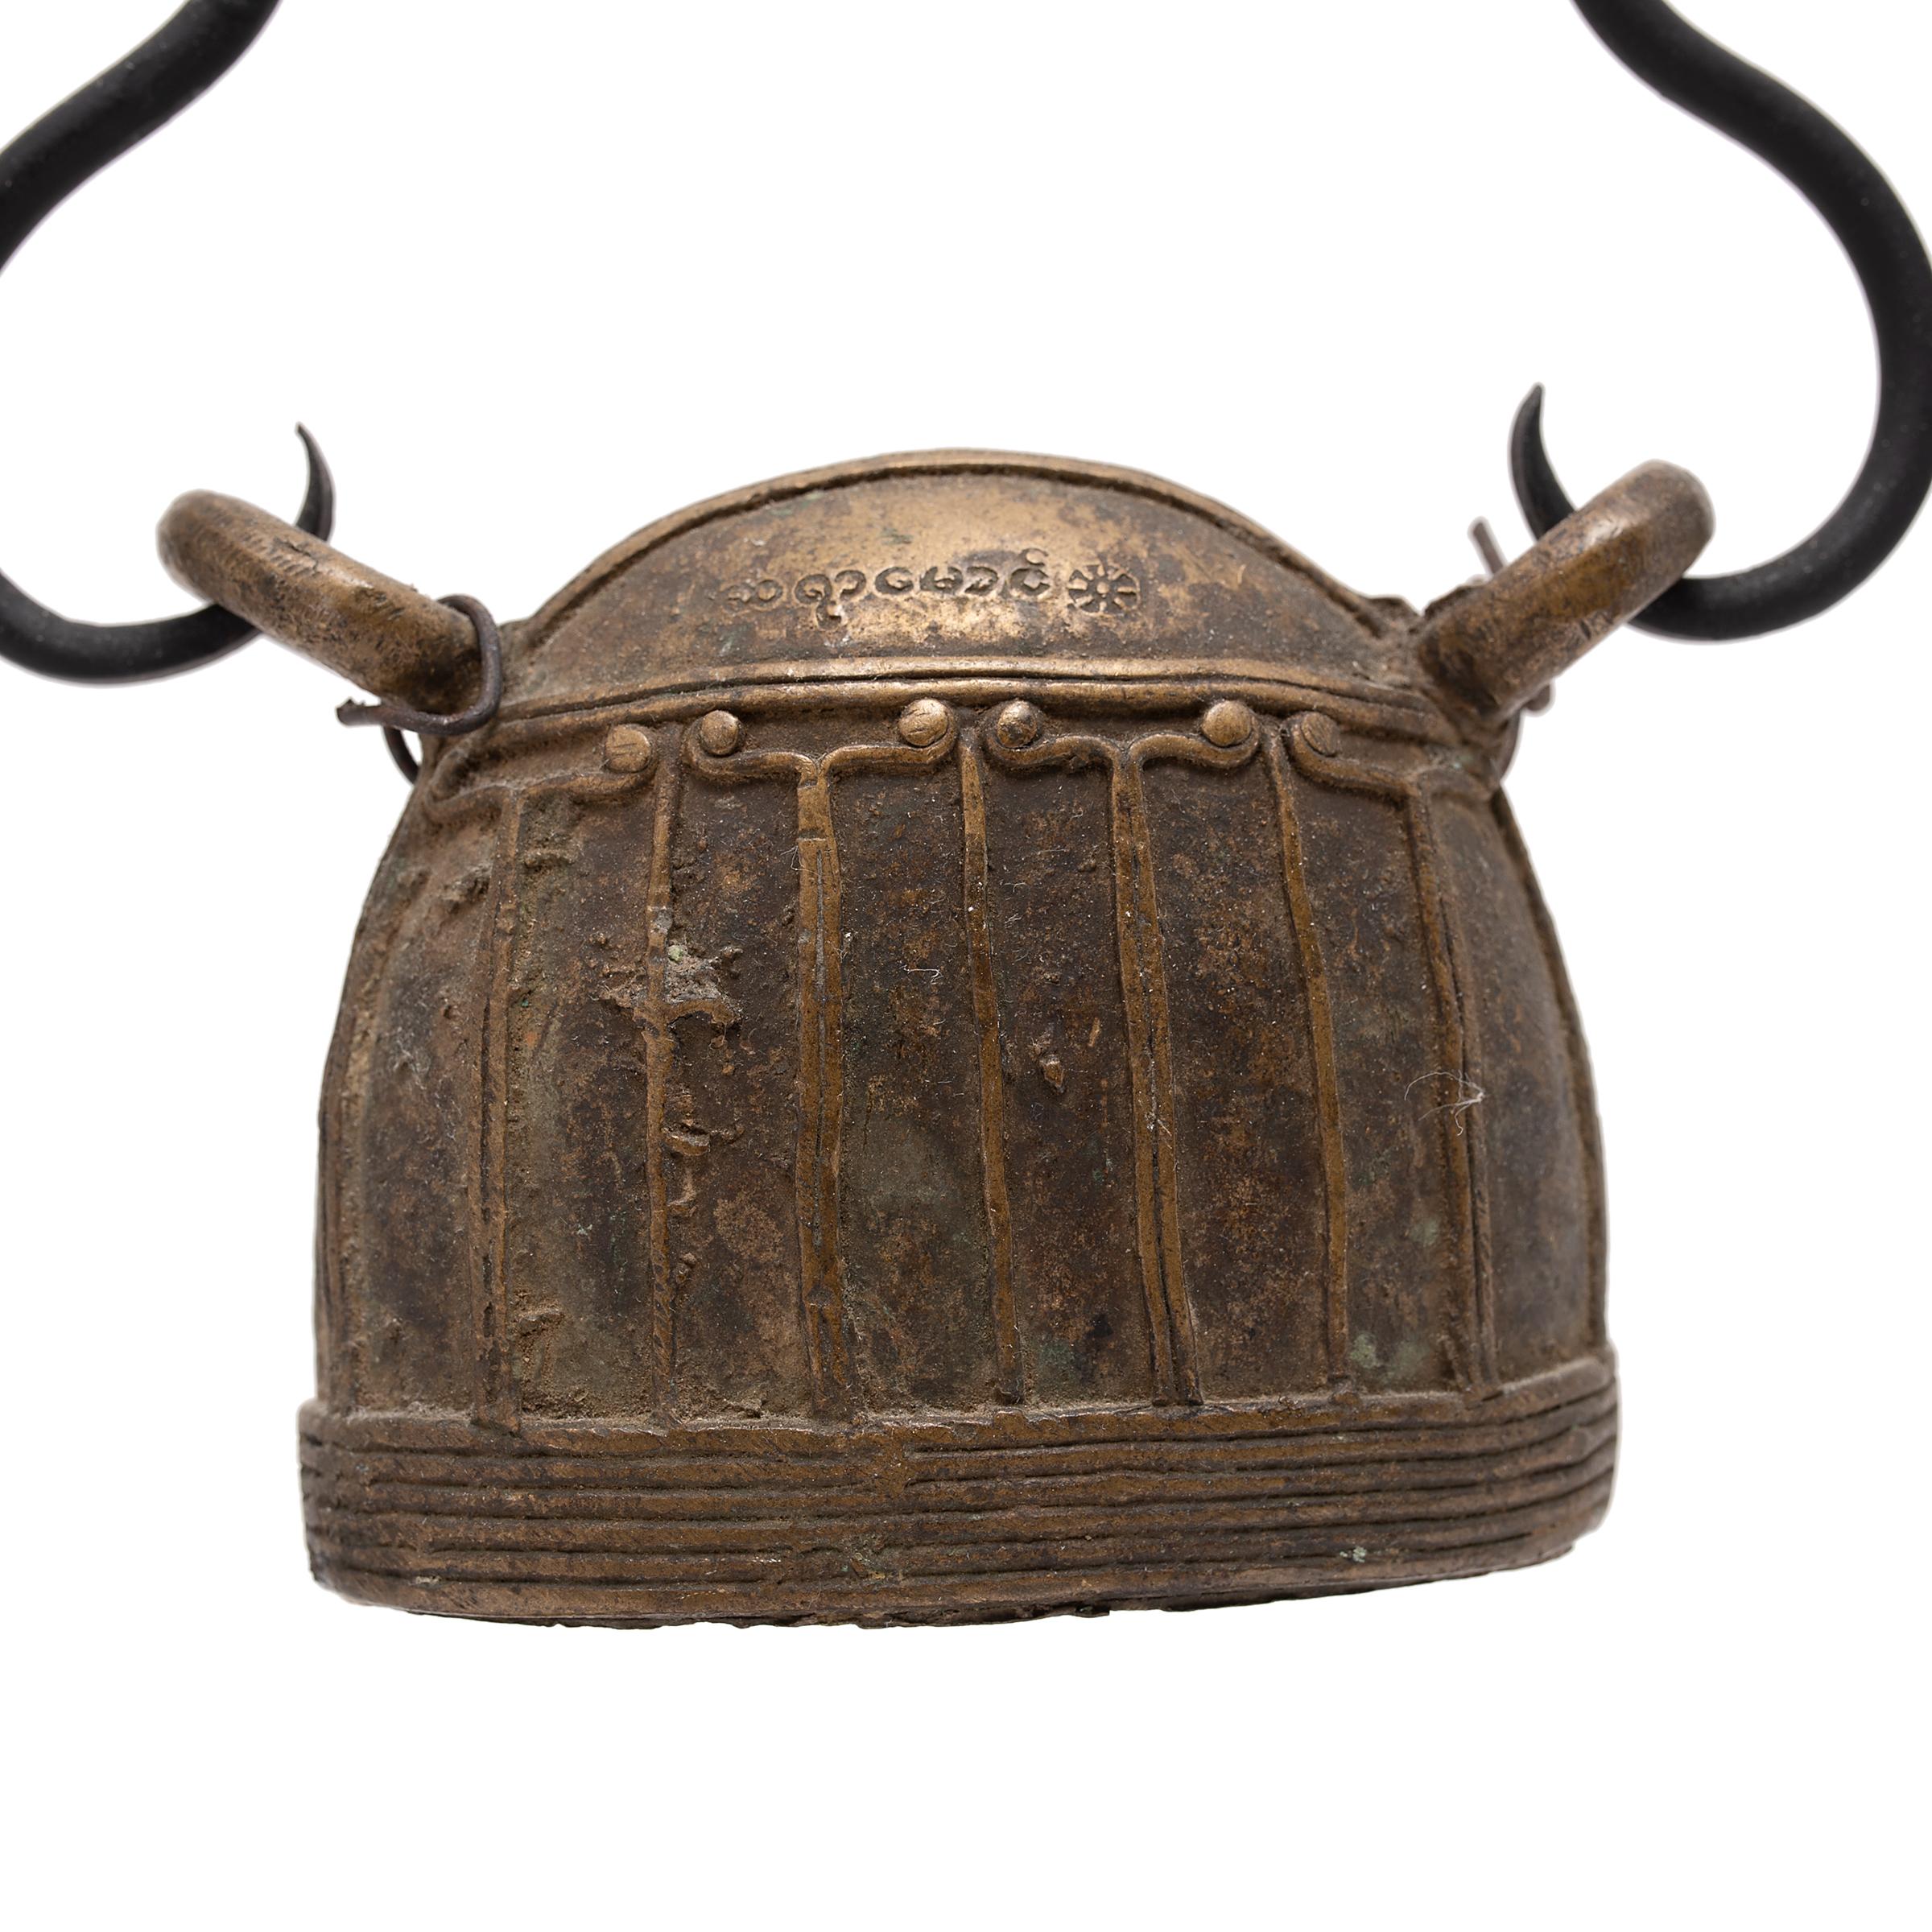 This large Burmese bell is known as hka-lauk and was used to track the movement of a livestock animal, strung from a collar by the two loops at the top. Dated to the 19th century, the bell was cast of bronze using the lost wax method with a